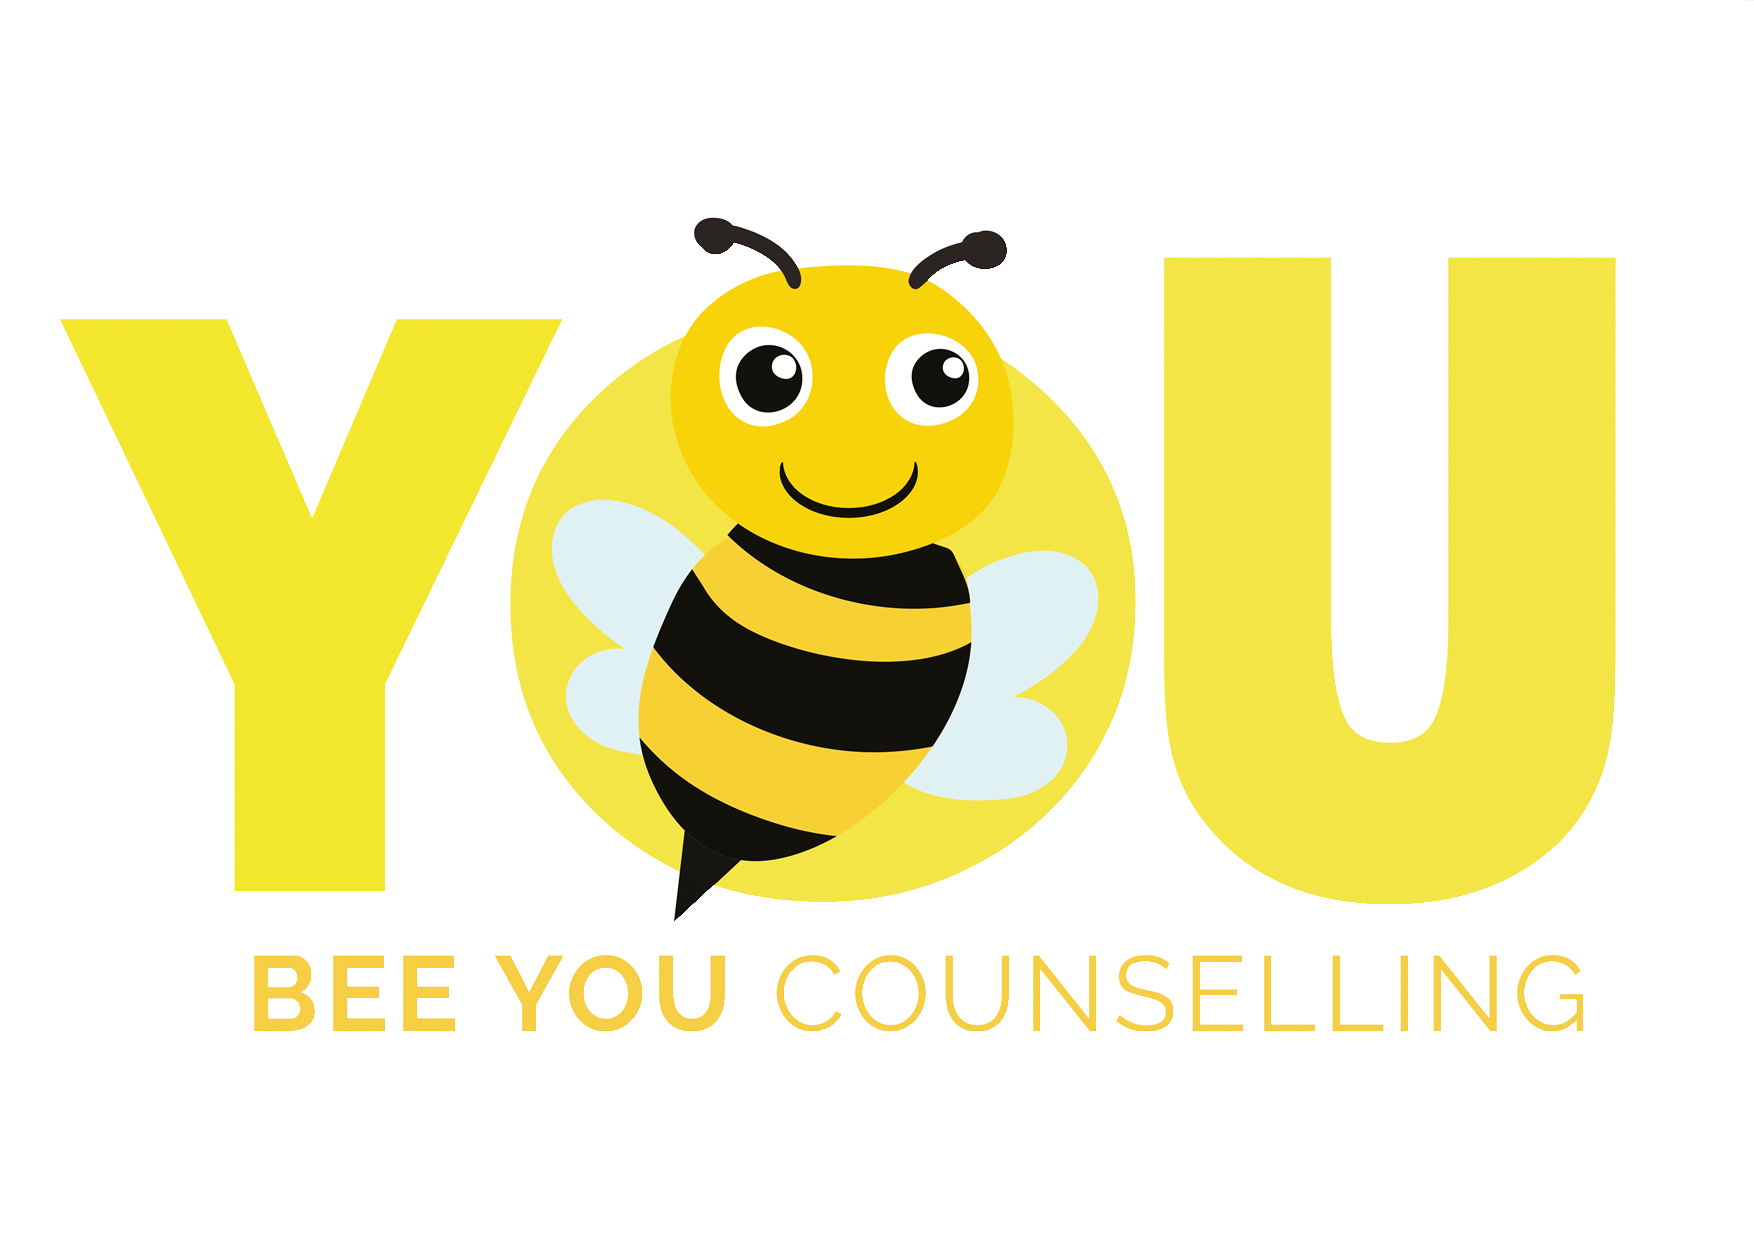 Bee You Counselling | Counselling with compassion